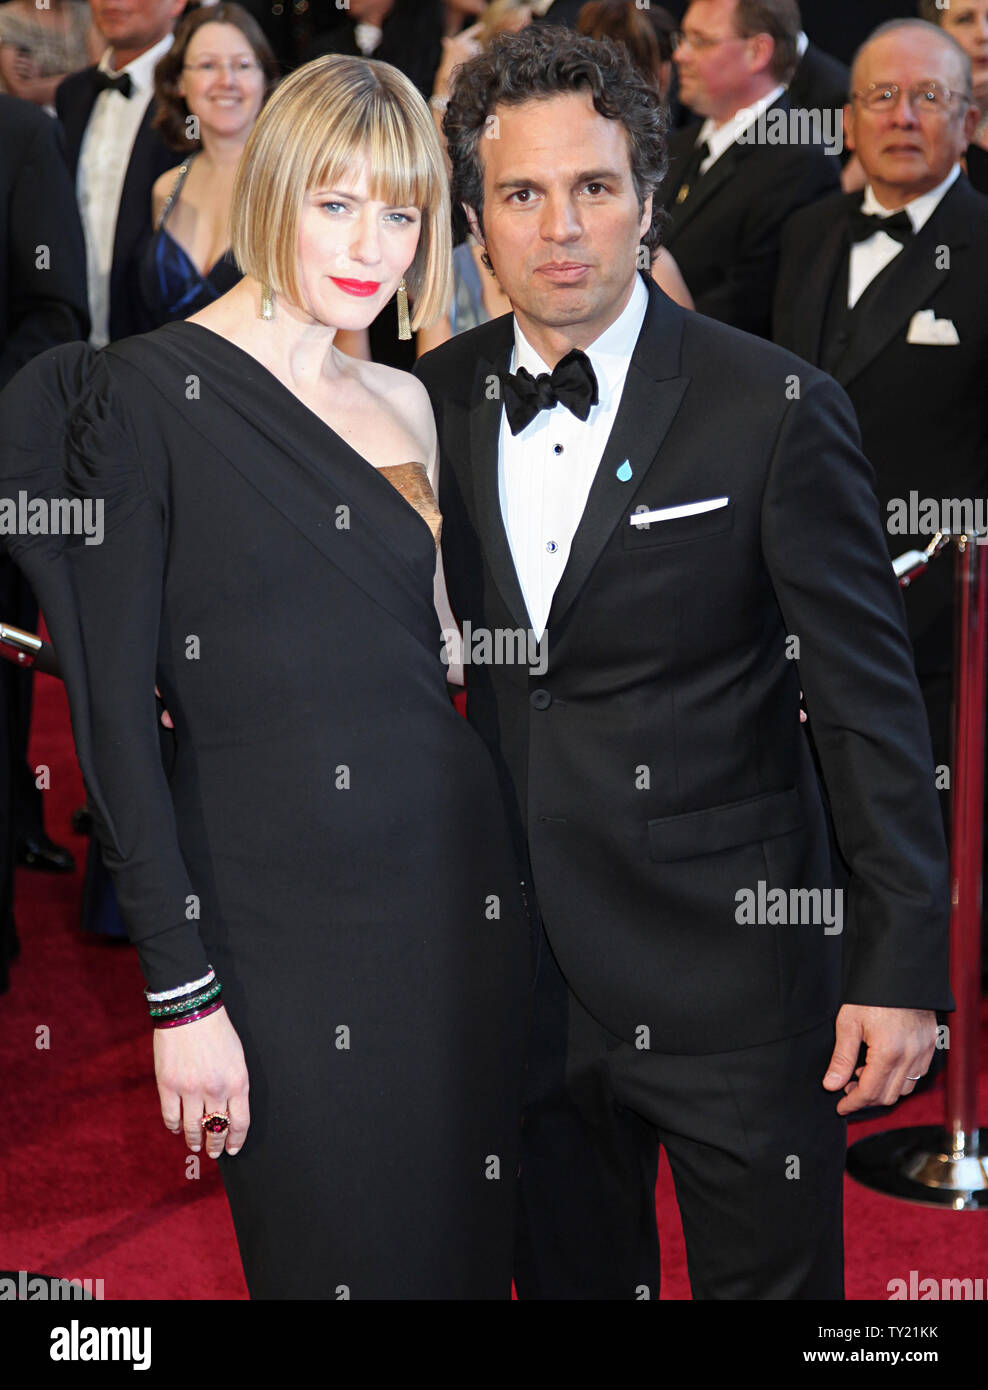 Mark Ruffalo and Sunrise Coigney arrive on the red carpet for the 83rd annual Academy Awards at the Kodak Theater in Hollywood on February 27, 2011.  UPI/David Silpa Stock Photo